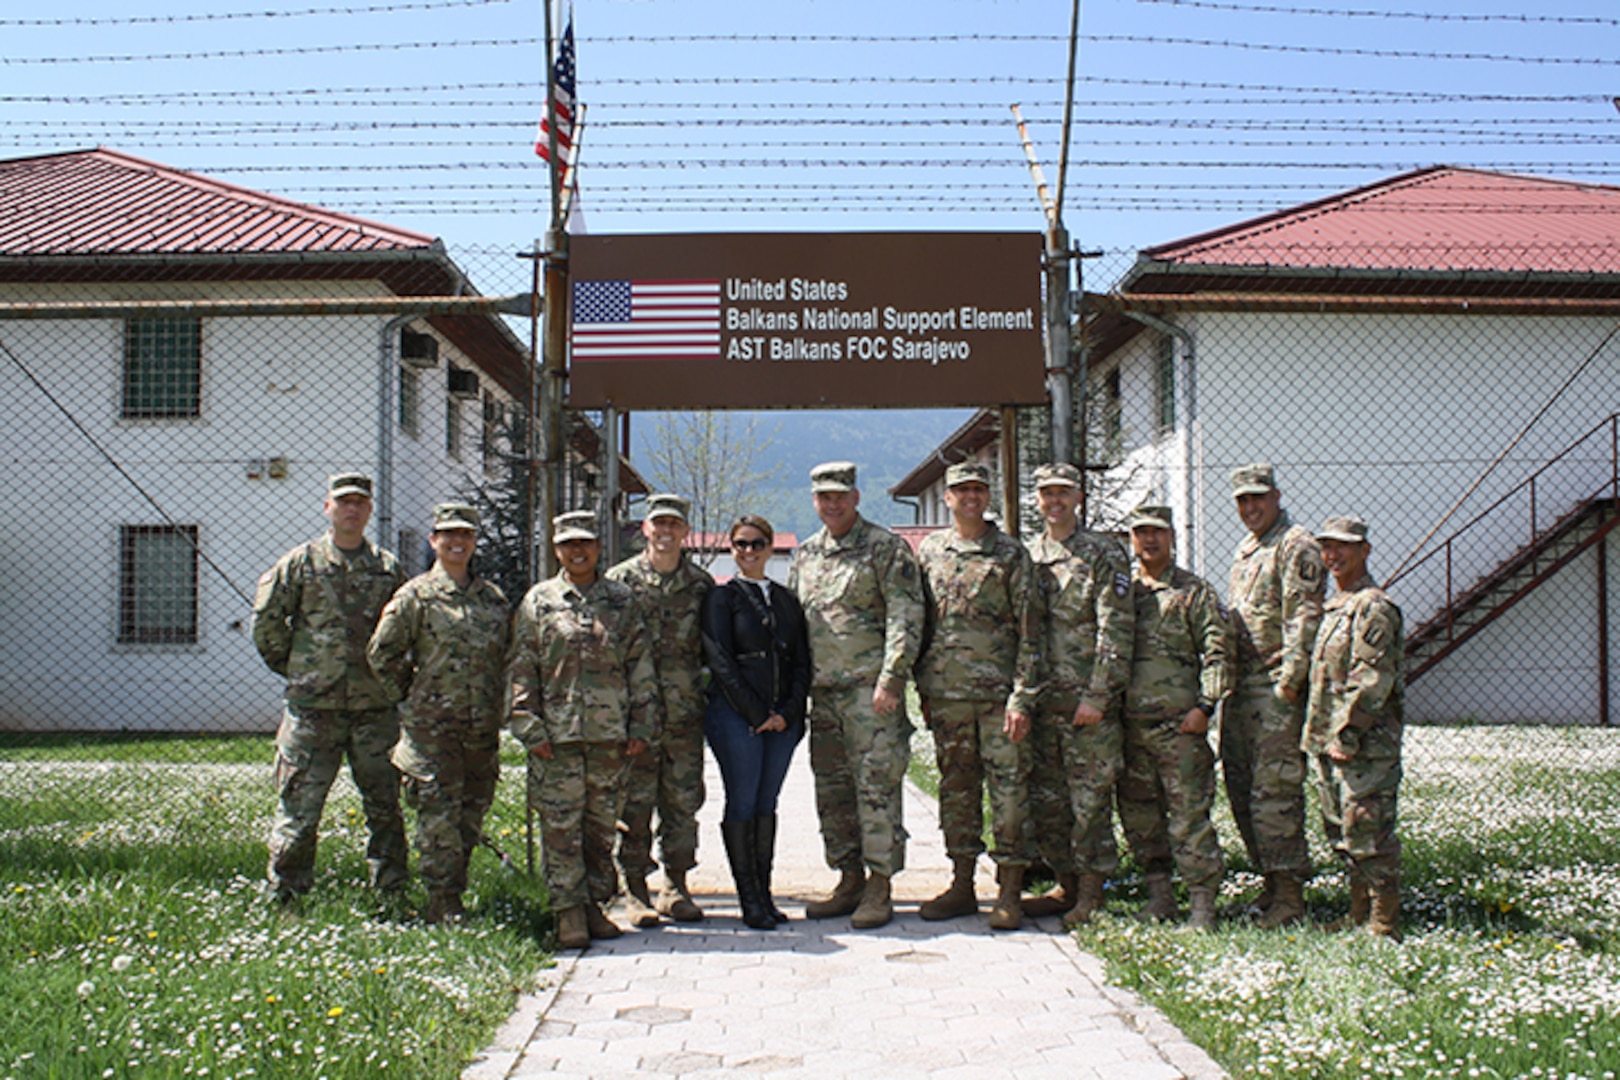 Multi-National Battle Group - East Cmdr. Col. Nick Ducich, members of his staff and Soldiers from NATO Headquarter -Sarajevo pose for a picture at Camp Butmir in Sarajevo, Bosnia and Herzegovina, April 24, 2018. Each Kosovo Force (KFOR) rotation provides Soldiers for NATO Headquarters- Sarajevo to oversee Camp Butmir, support the Bosnia and Herzegovina training mission, and provide essential services on the camp for the European Union Force Althea (EUFOR Althea) peacekeeping element.